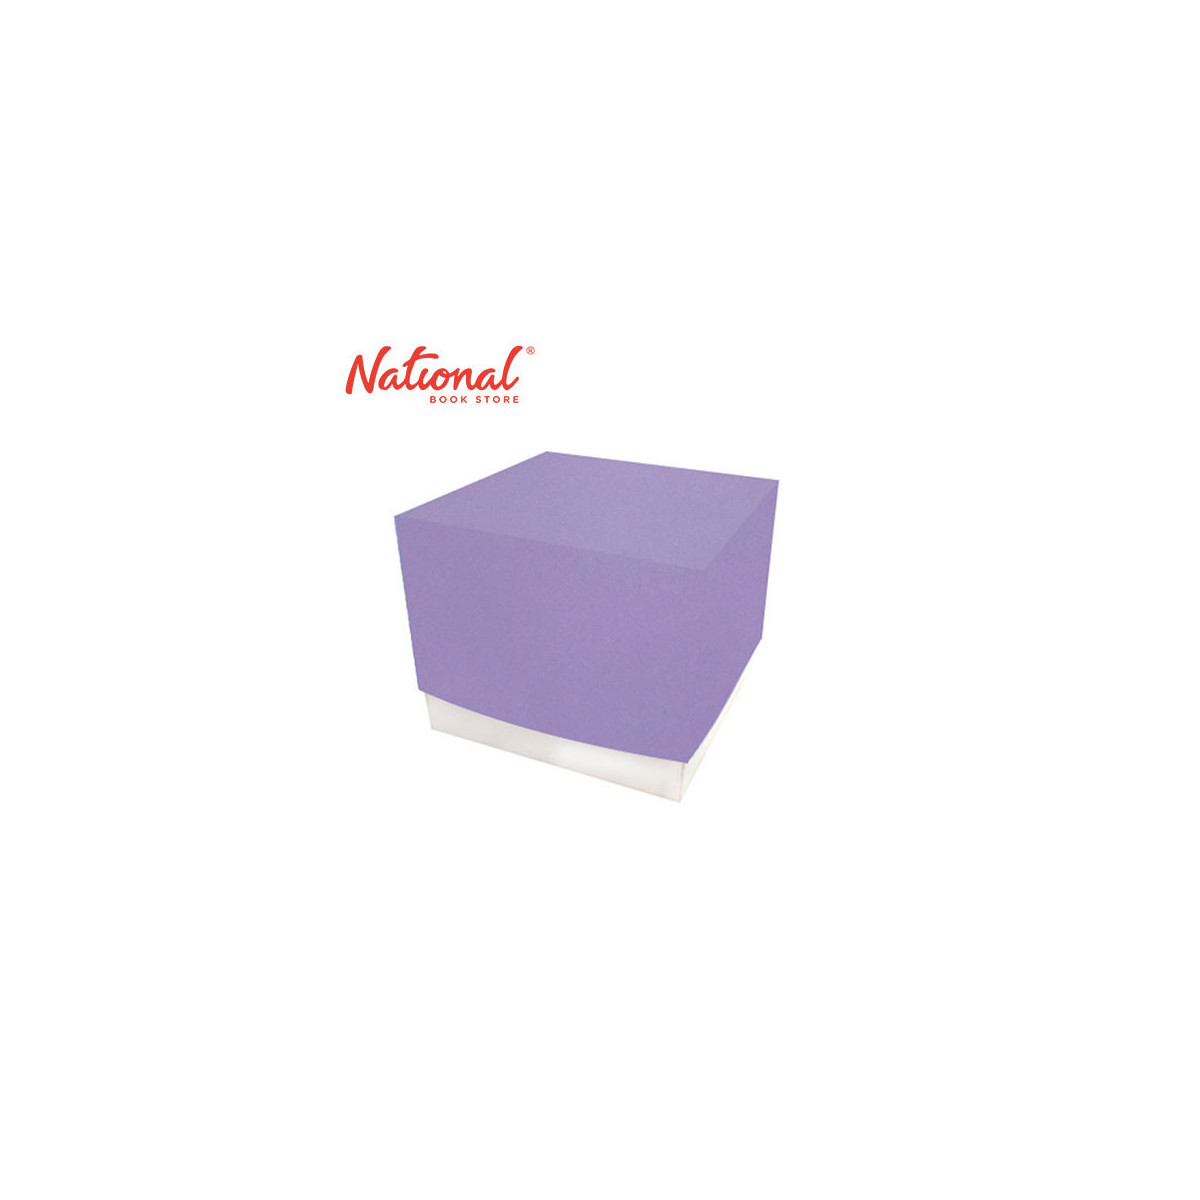 BossBox Plain Colored Gift Box 5S Amethyst S1 3.25x3.25x2.75 3028420 - Giftwrapping Supplies